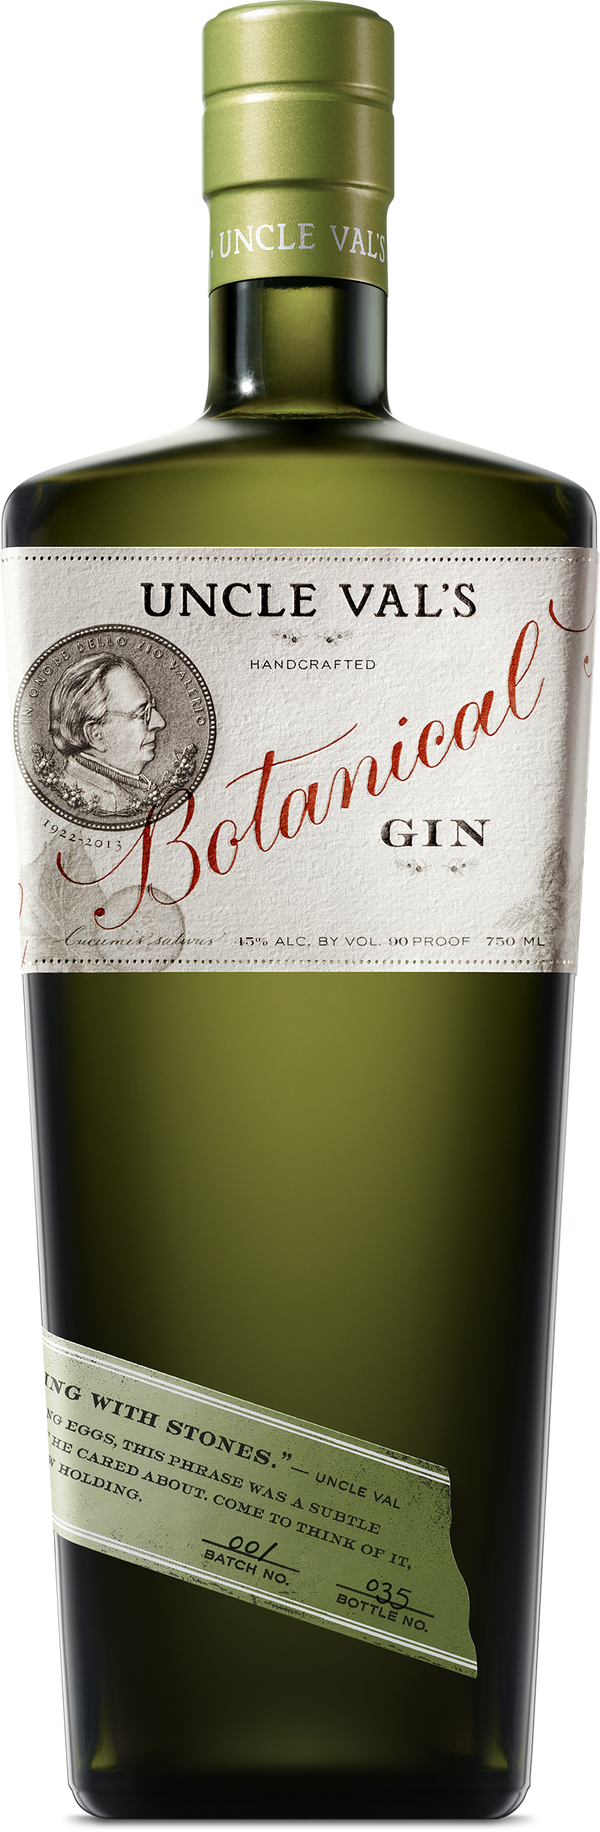 Botanical Gin 0,7l 45% Vol. Uncle Val's